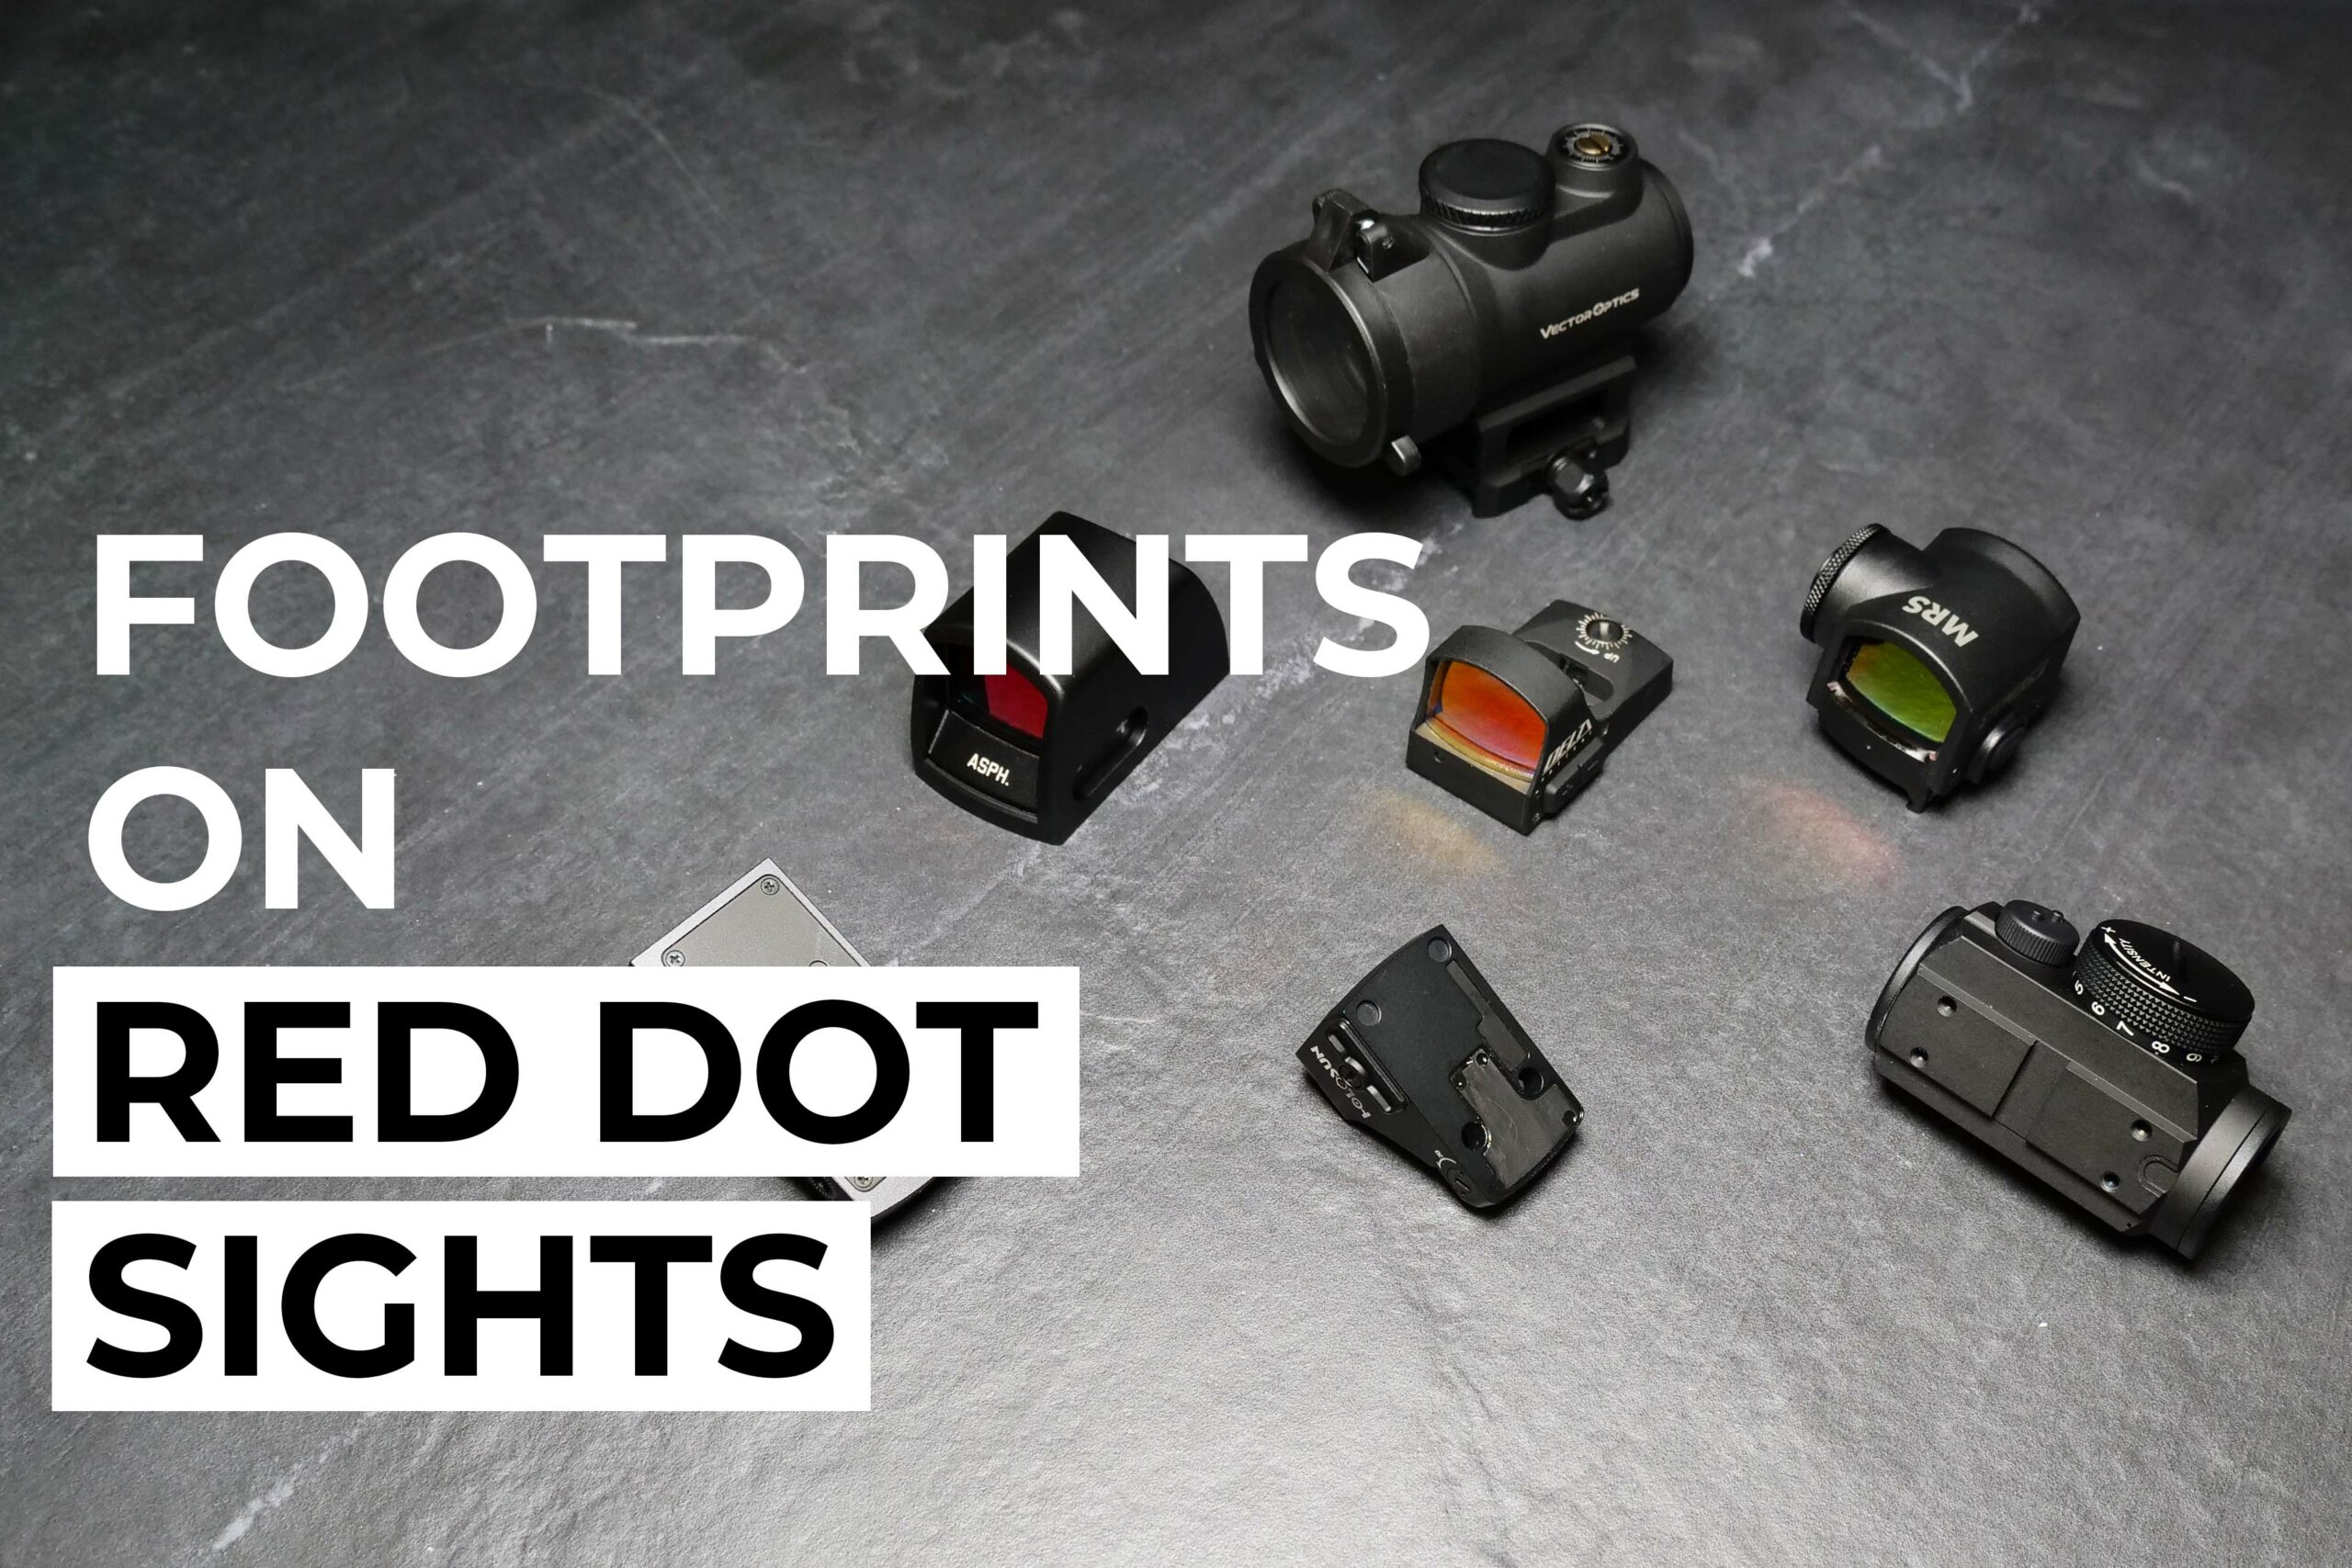 Footprints/Mounting Standards on Red Dot Sights